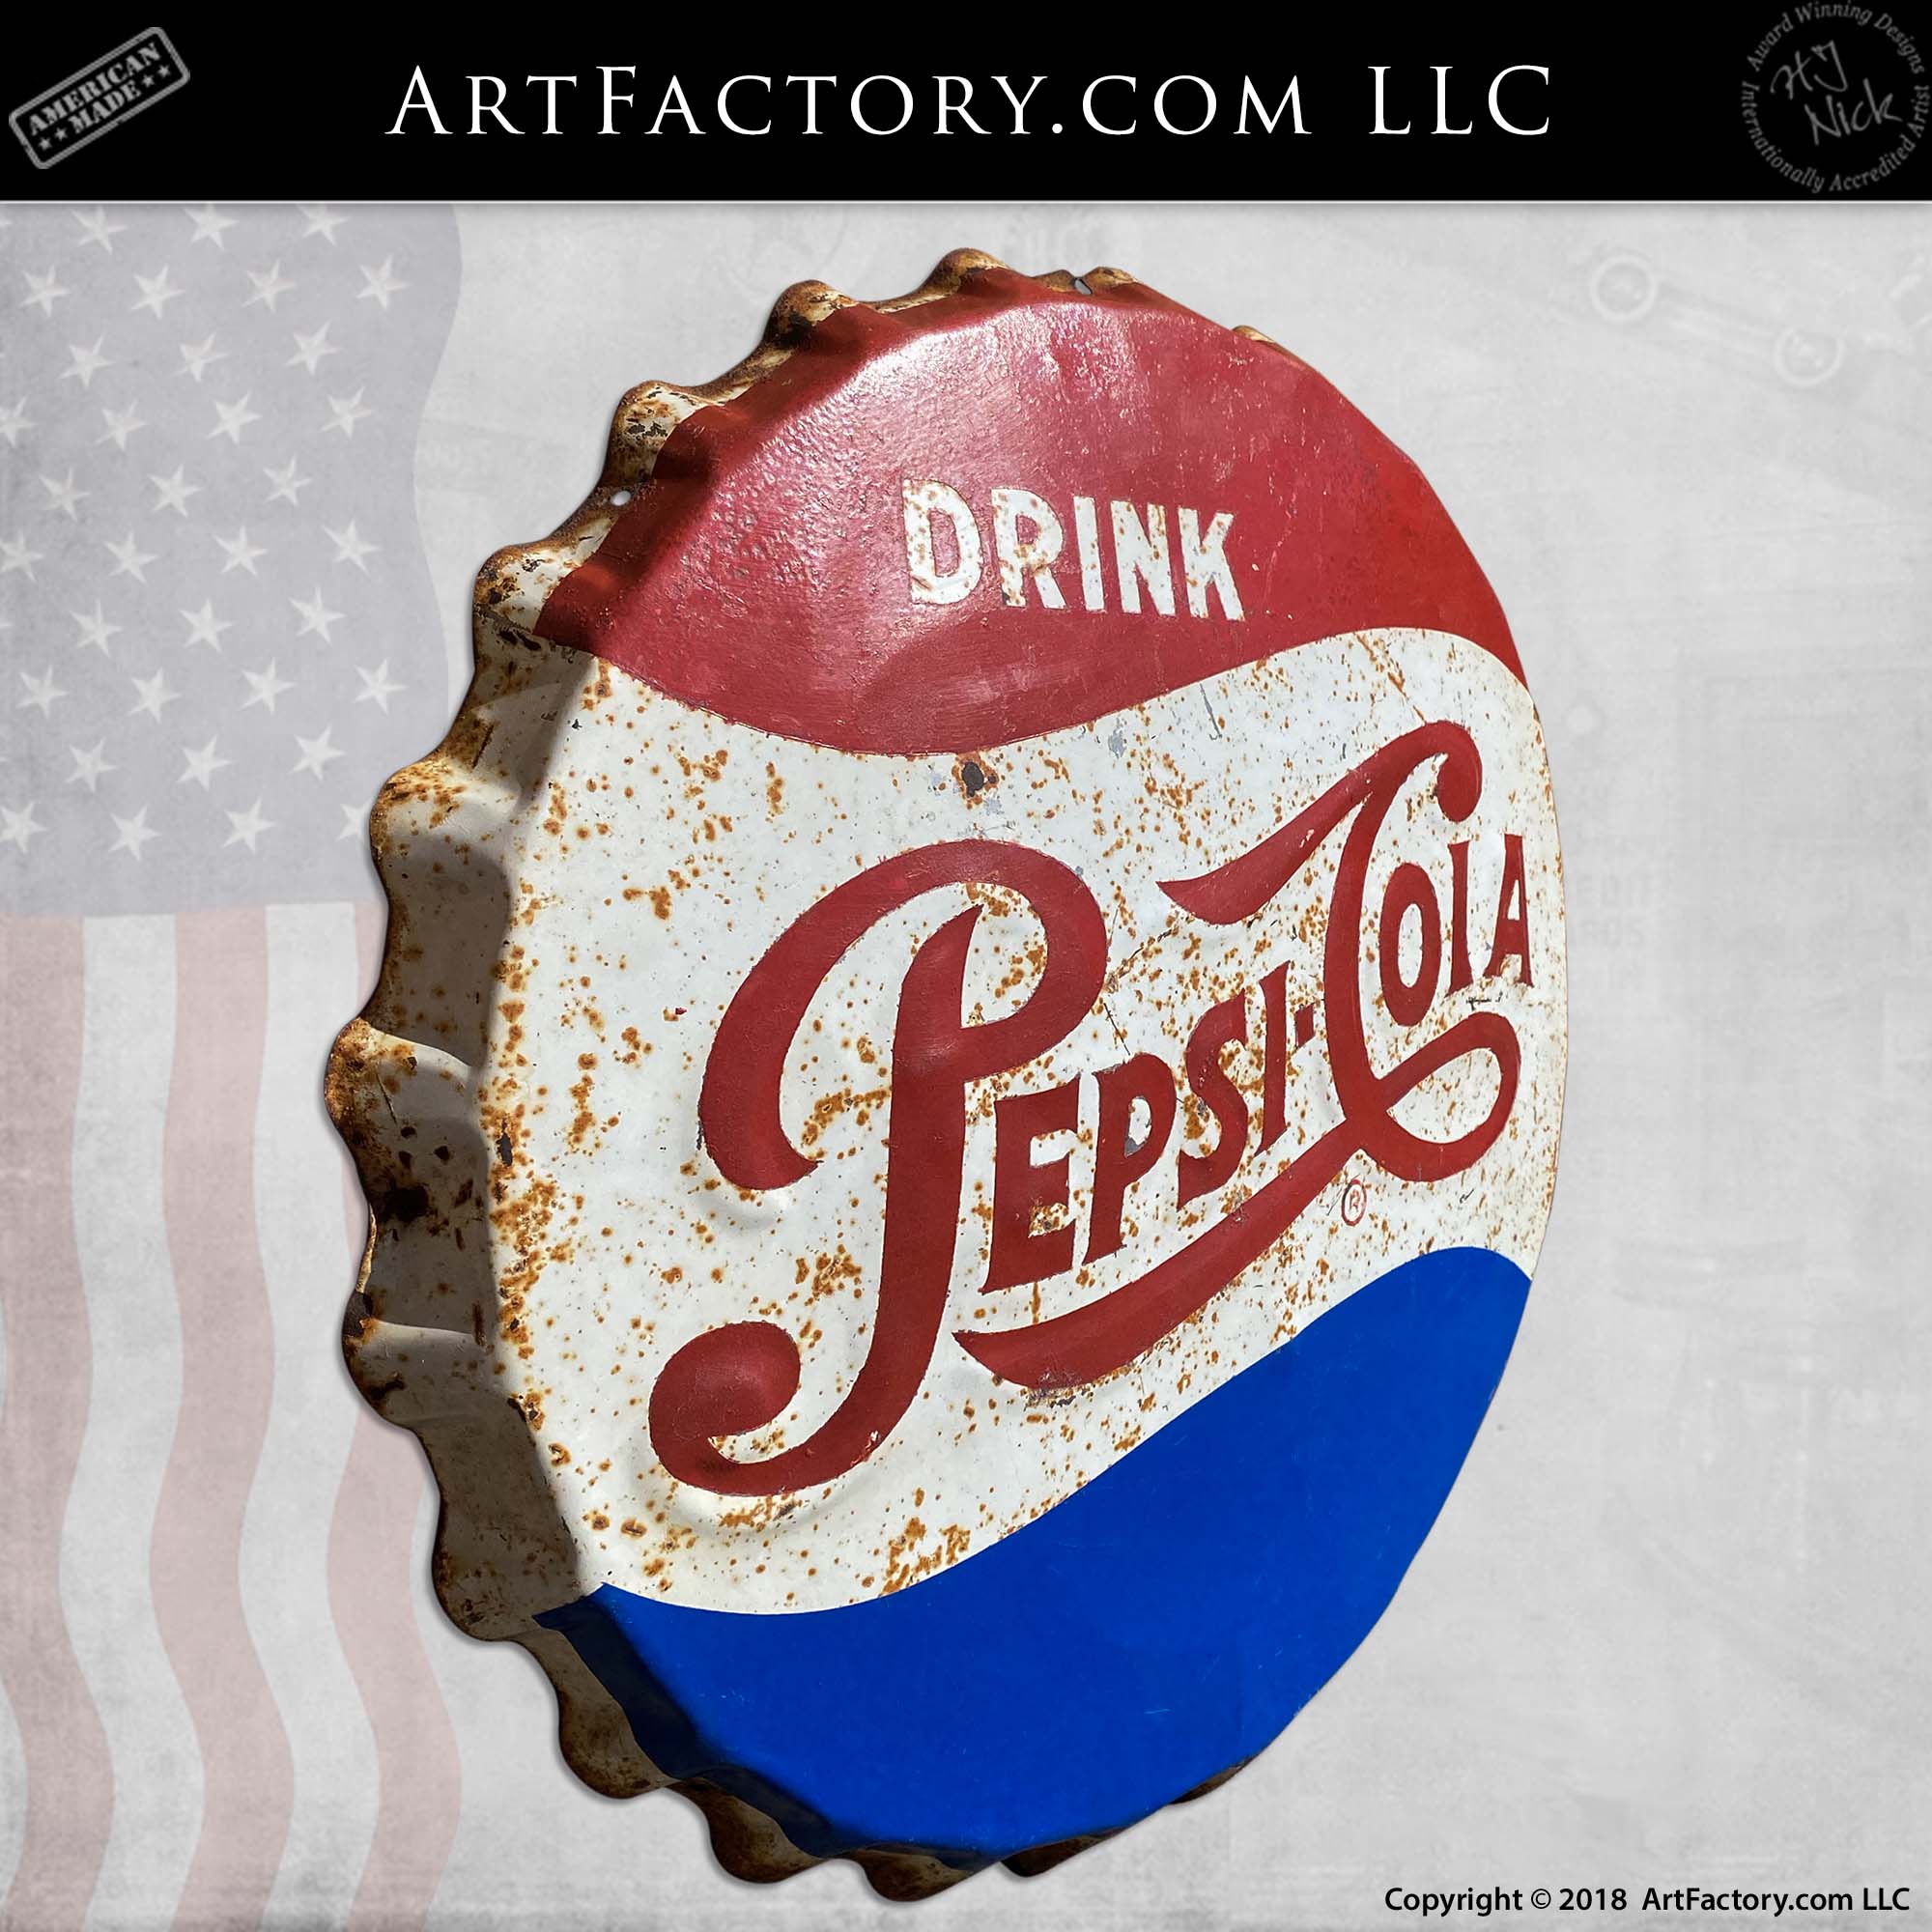 PEPSI COLA BOTTLE CAPS AD COLLECT 7 pinback buttons NNZ 